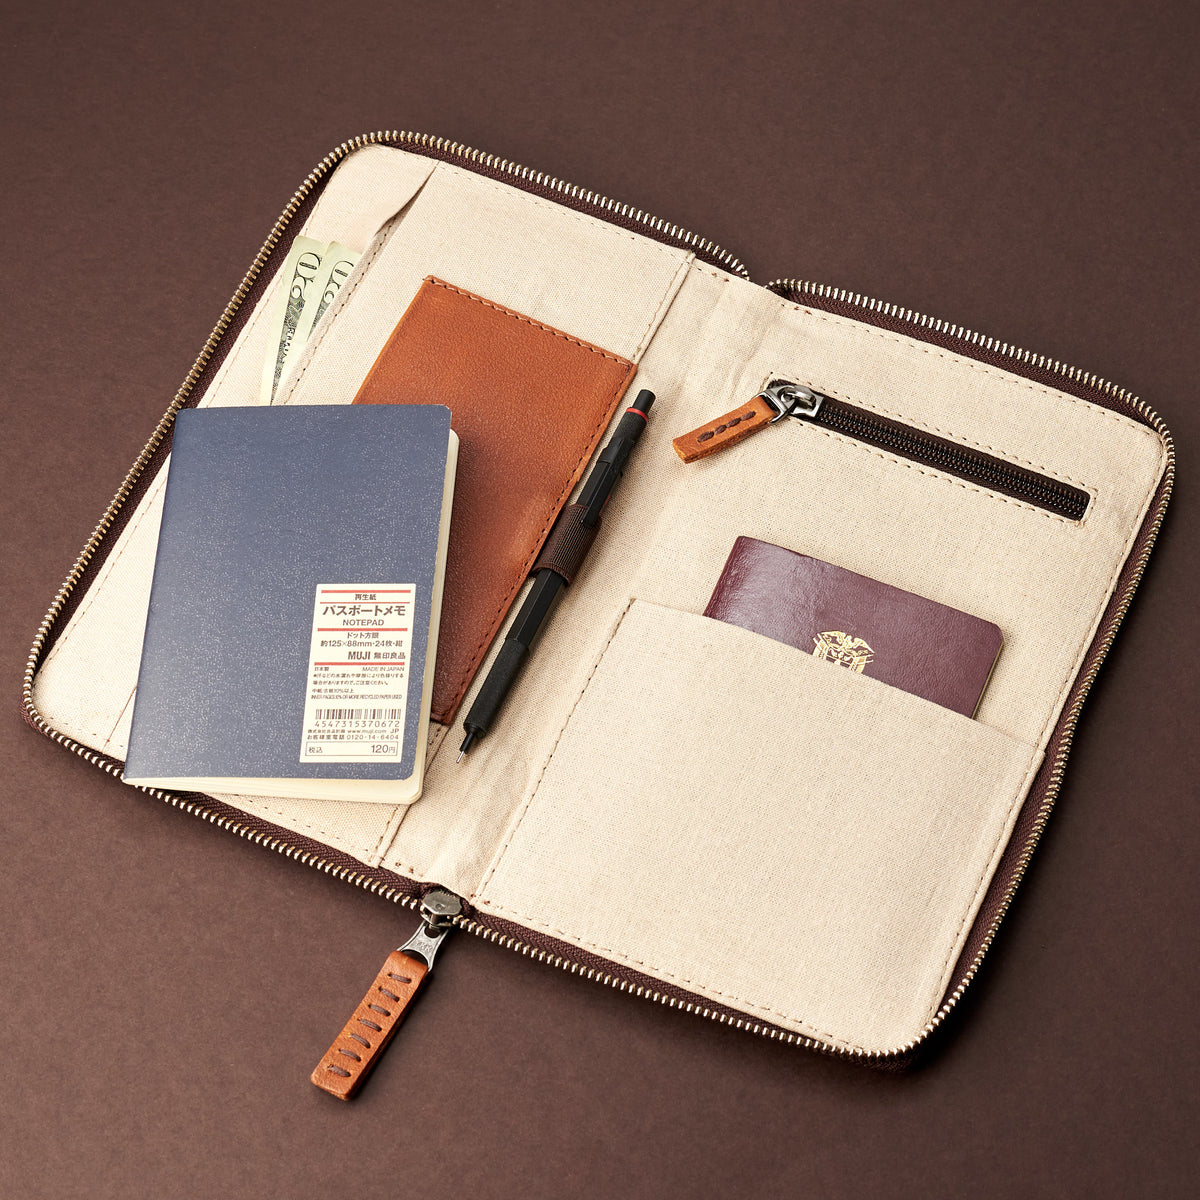 Travel accessories. Tan leather passport holder. Airport travel leather organizer accessories. Leather good craft by Capra Leather.